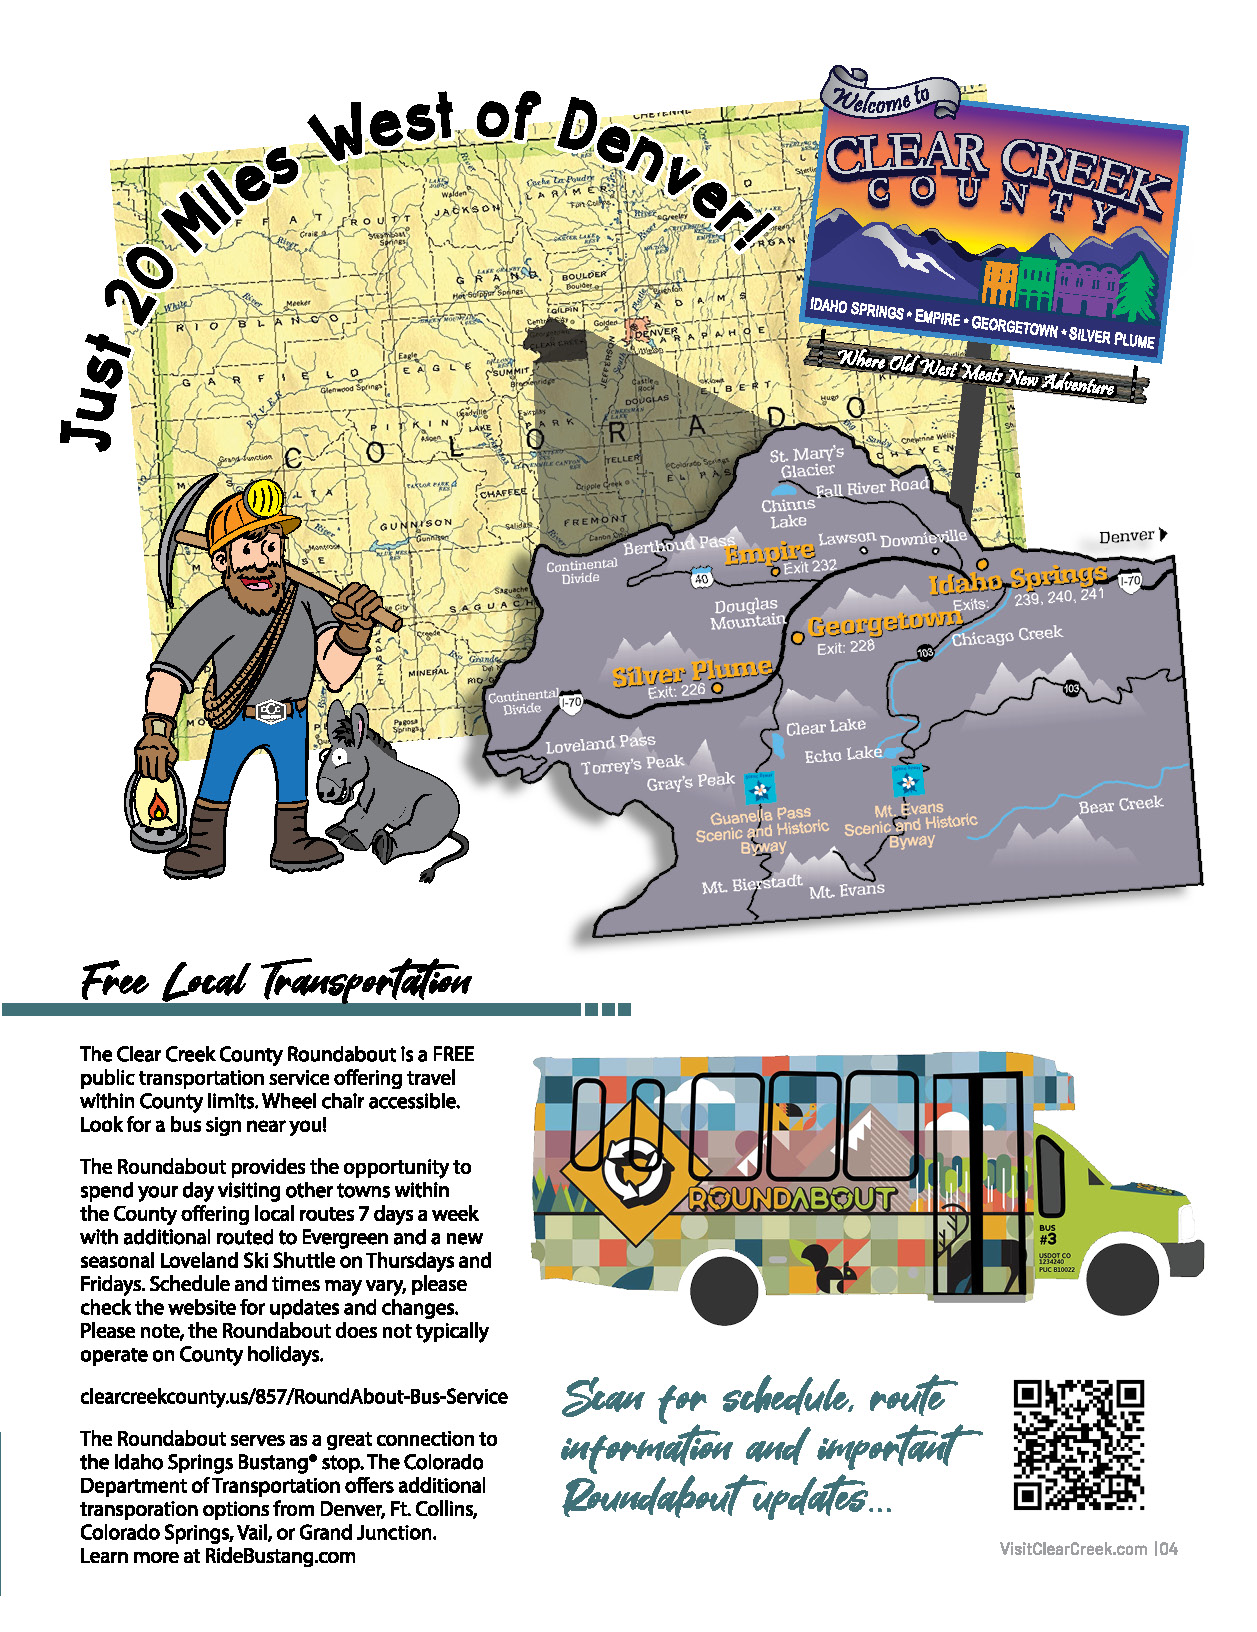 Clear Creek Visitor Guide Local Transportation